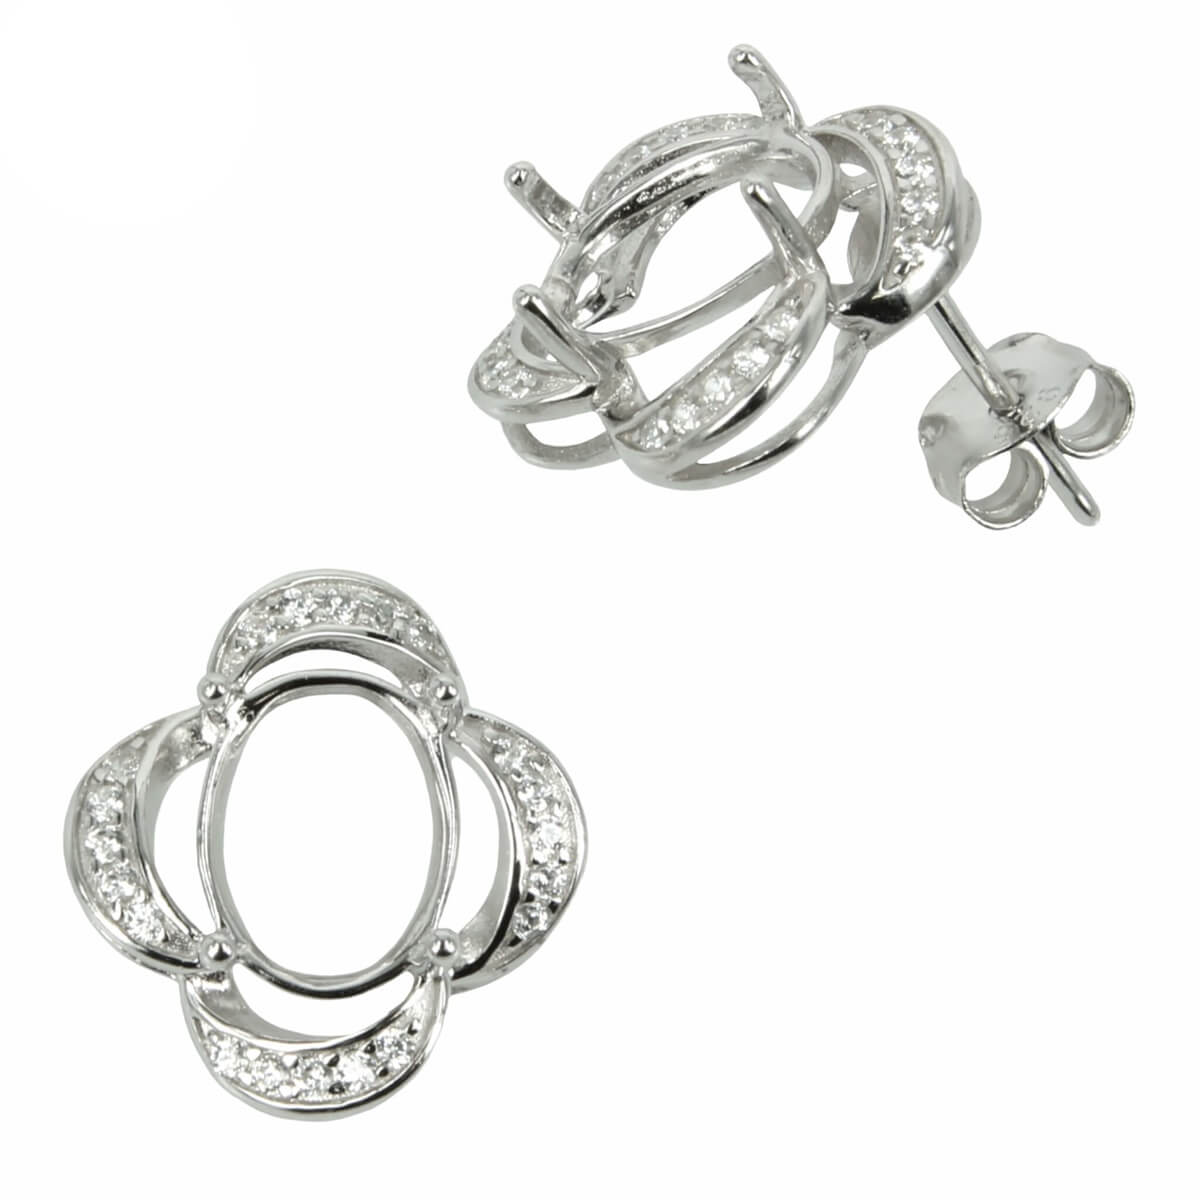 Quatrefoil CZ Halo Stud Earrings with Oval Prong Mounting in Sterling Silver for 7x9mm Stones 